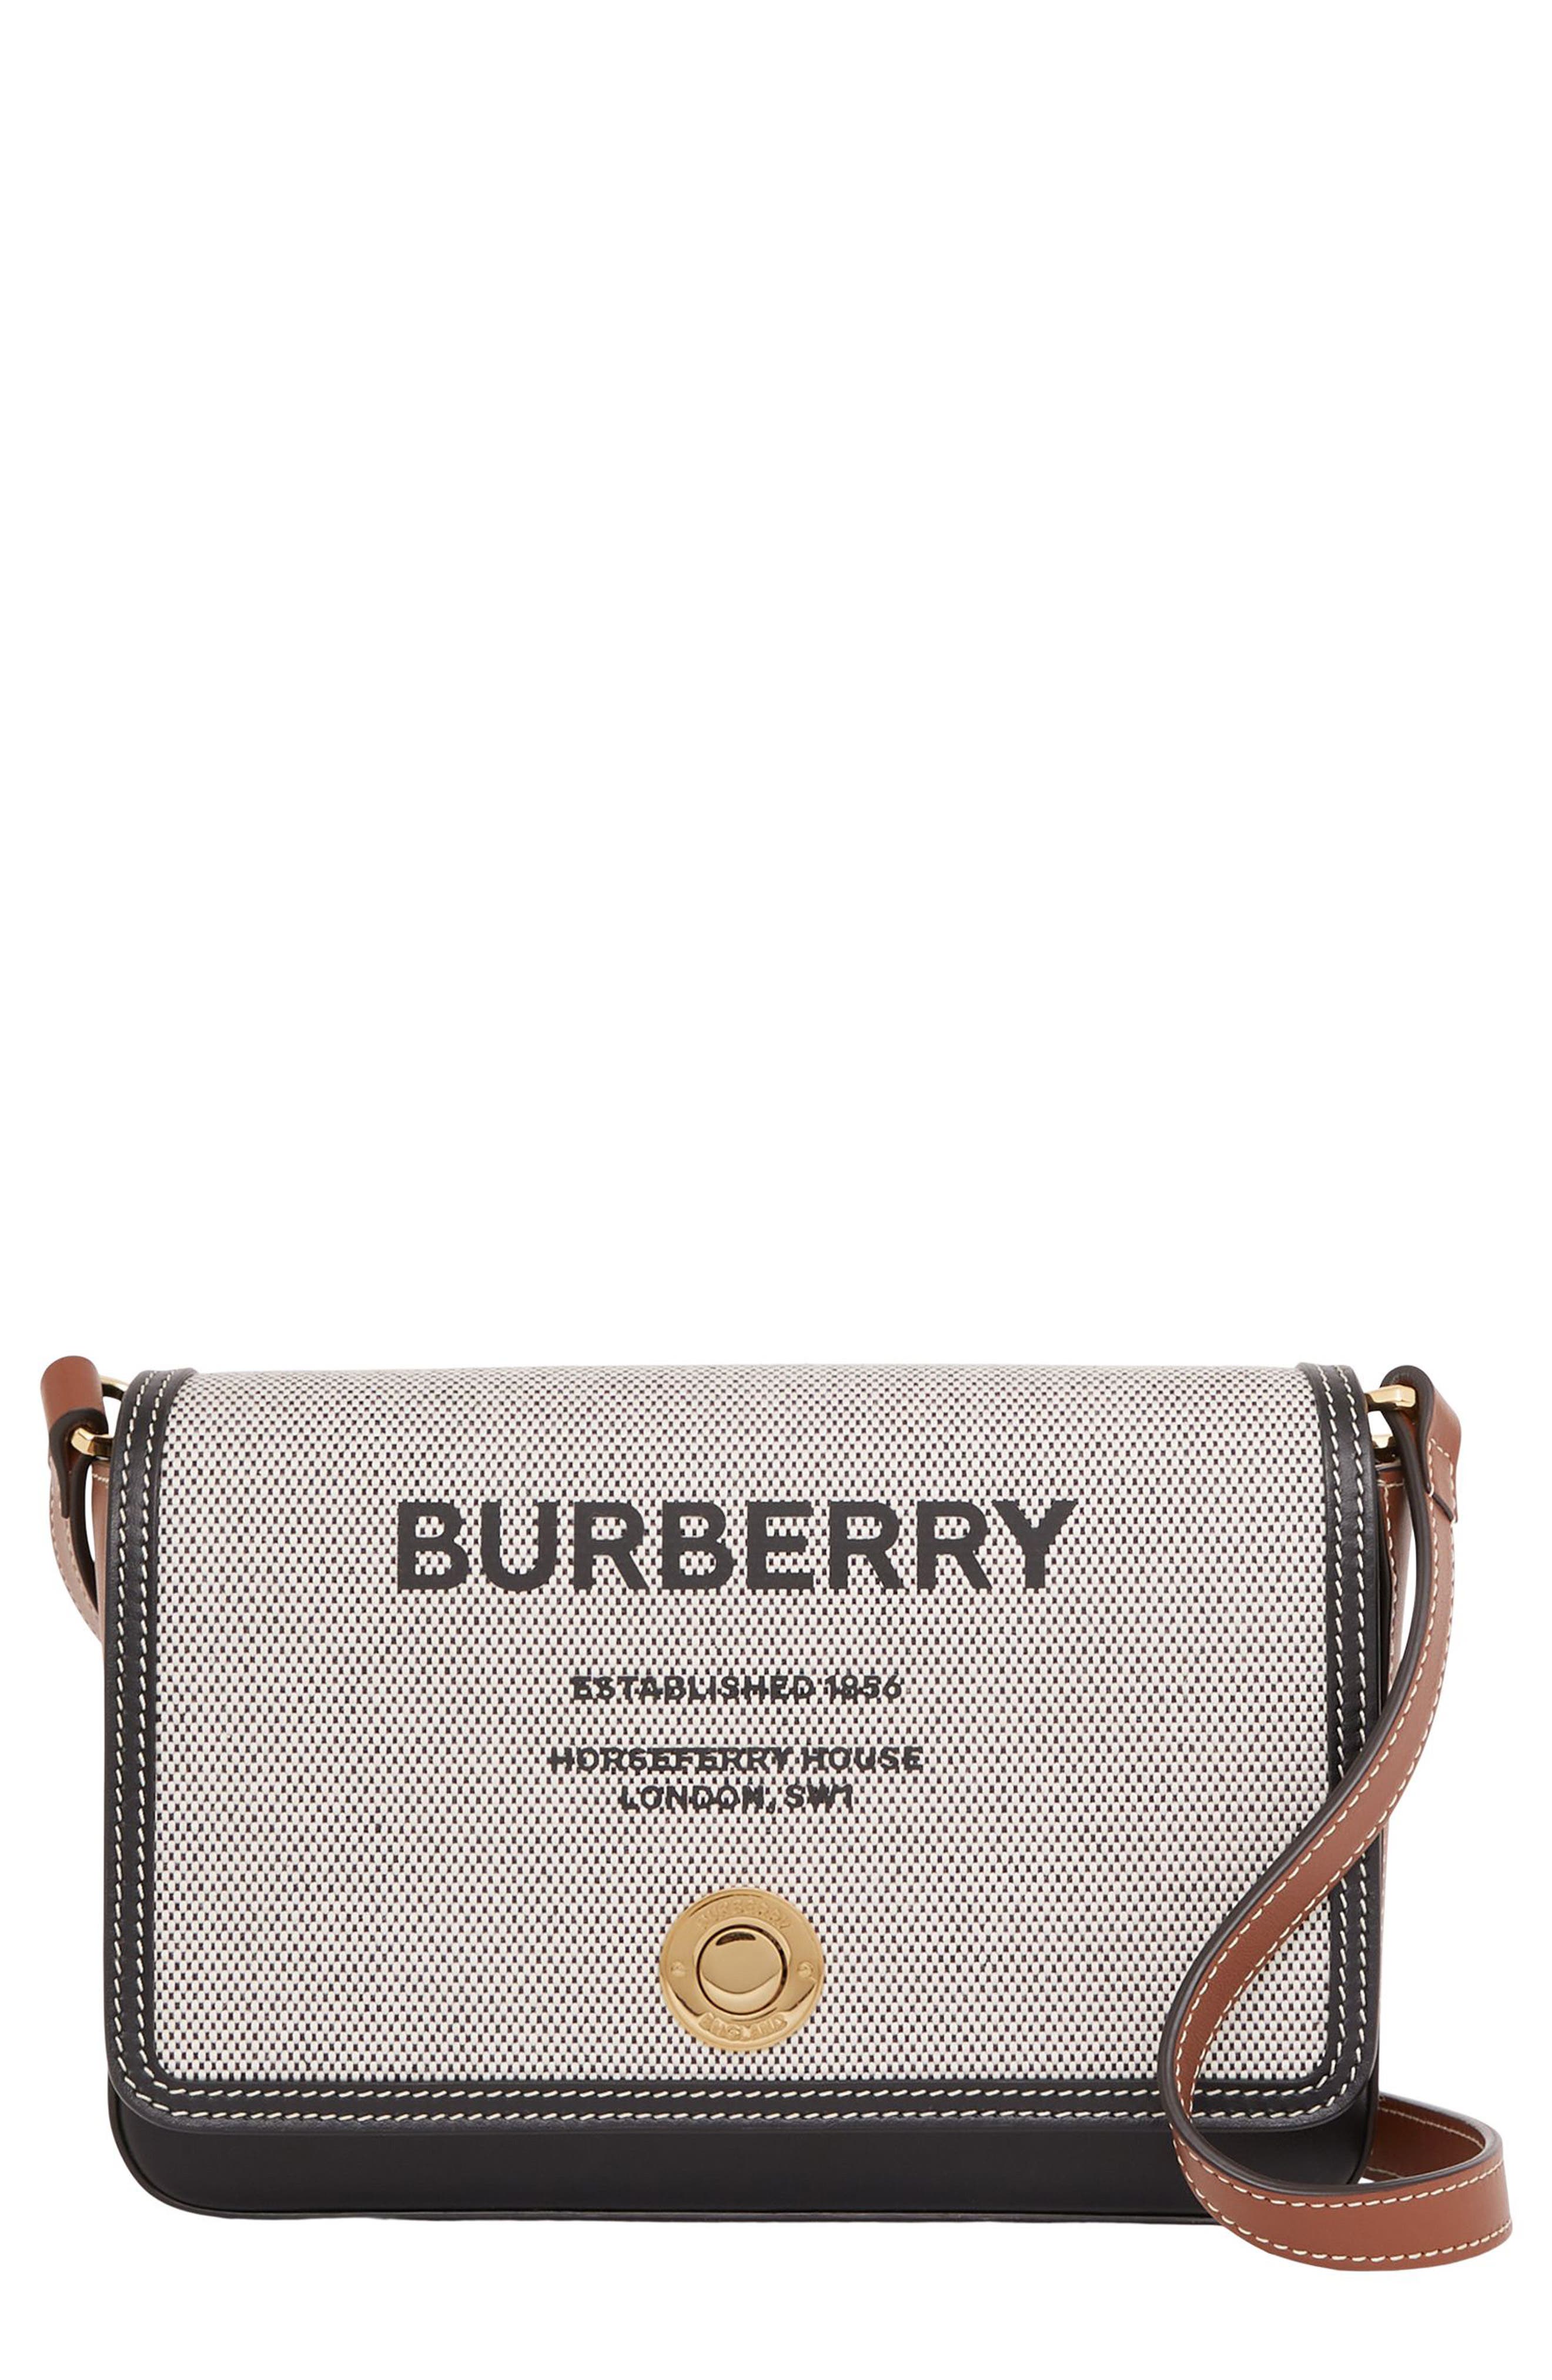 Burberry Hampshire Horseferry Logo Canvas & Leather Crossbody Bag in Black /Tan at Nordstrom